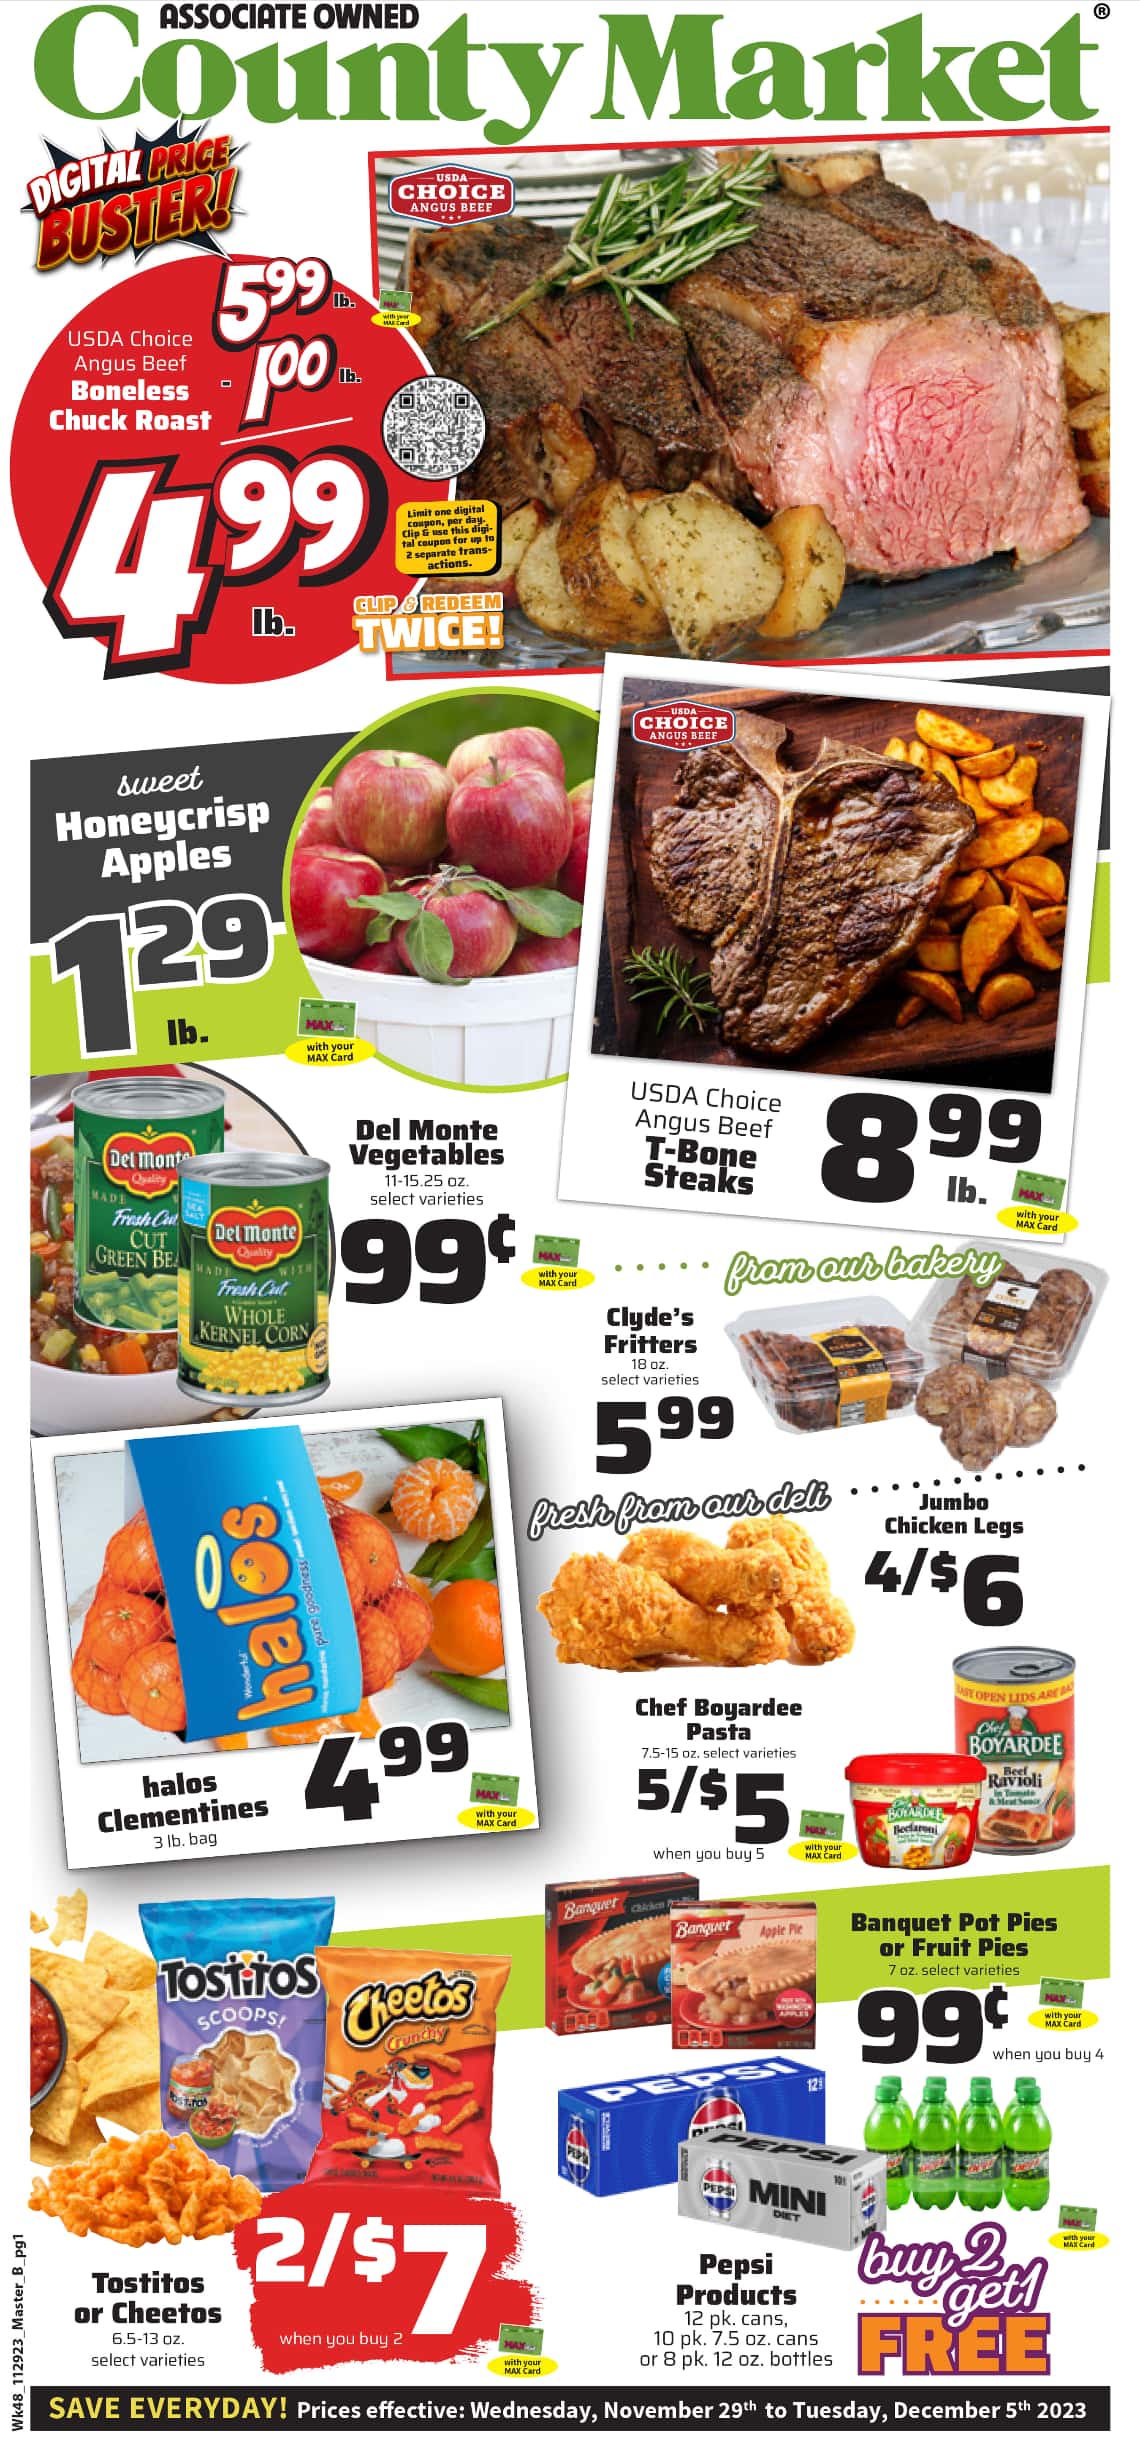 County Market Weekly Ad November 29 to December 5, 2023 1 – county market ad 1 3